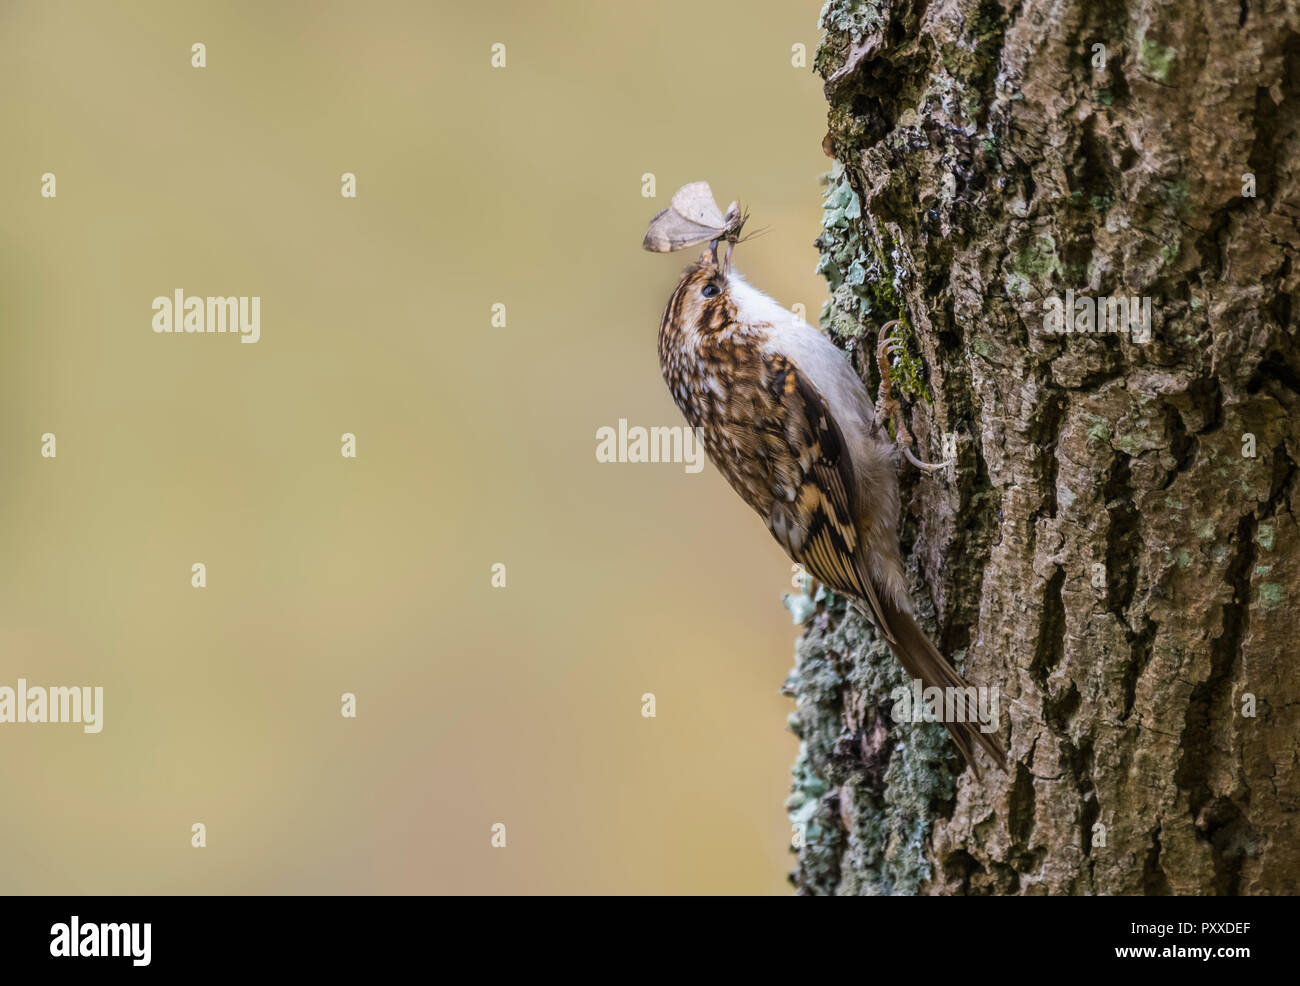 Eurasian Treecreeper bird (Certhia familiaris) climbing up a tree trunk eating a butterfly (insect) in Autumn in West Sussex, UK. Stock Photo